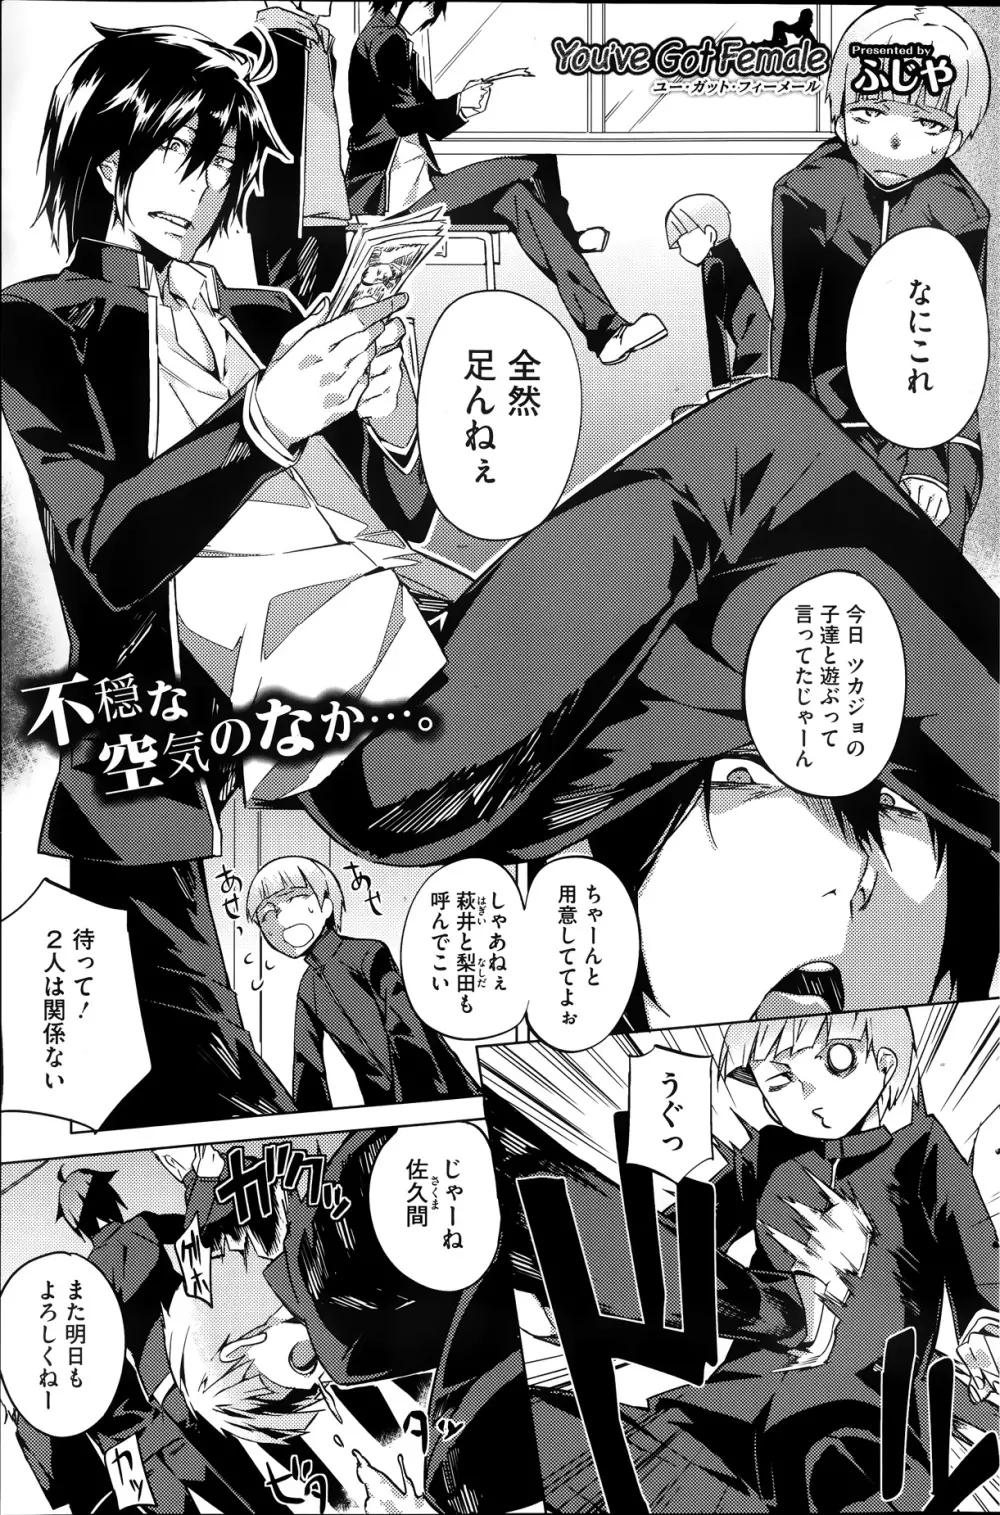 You've Got Female 第01-02話 Page.1